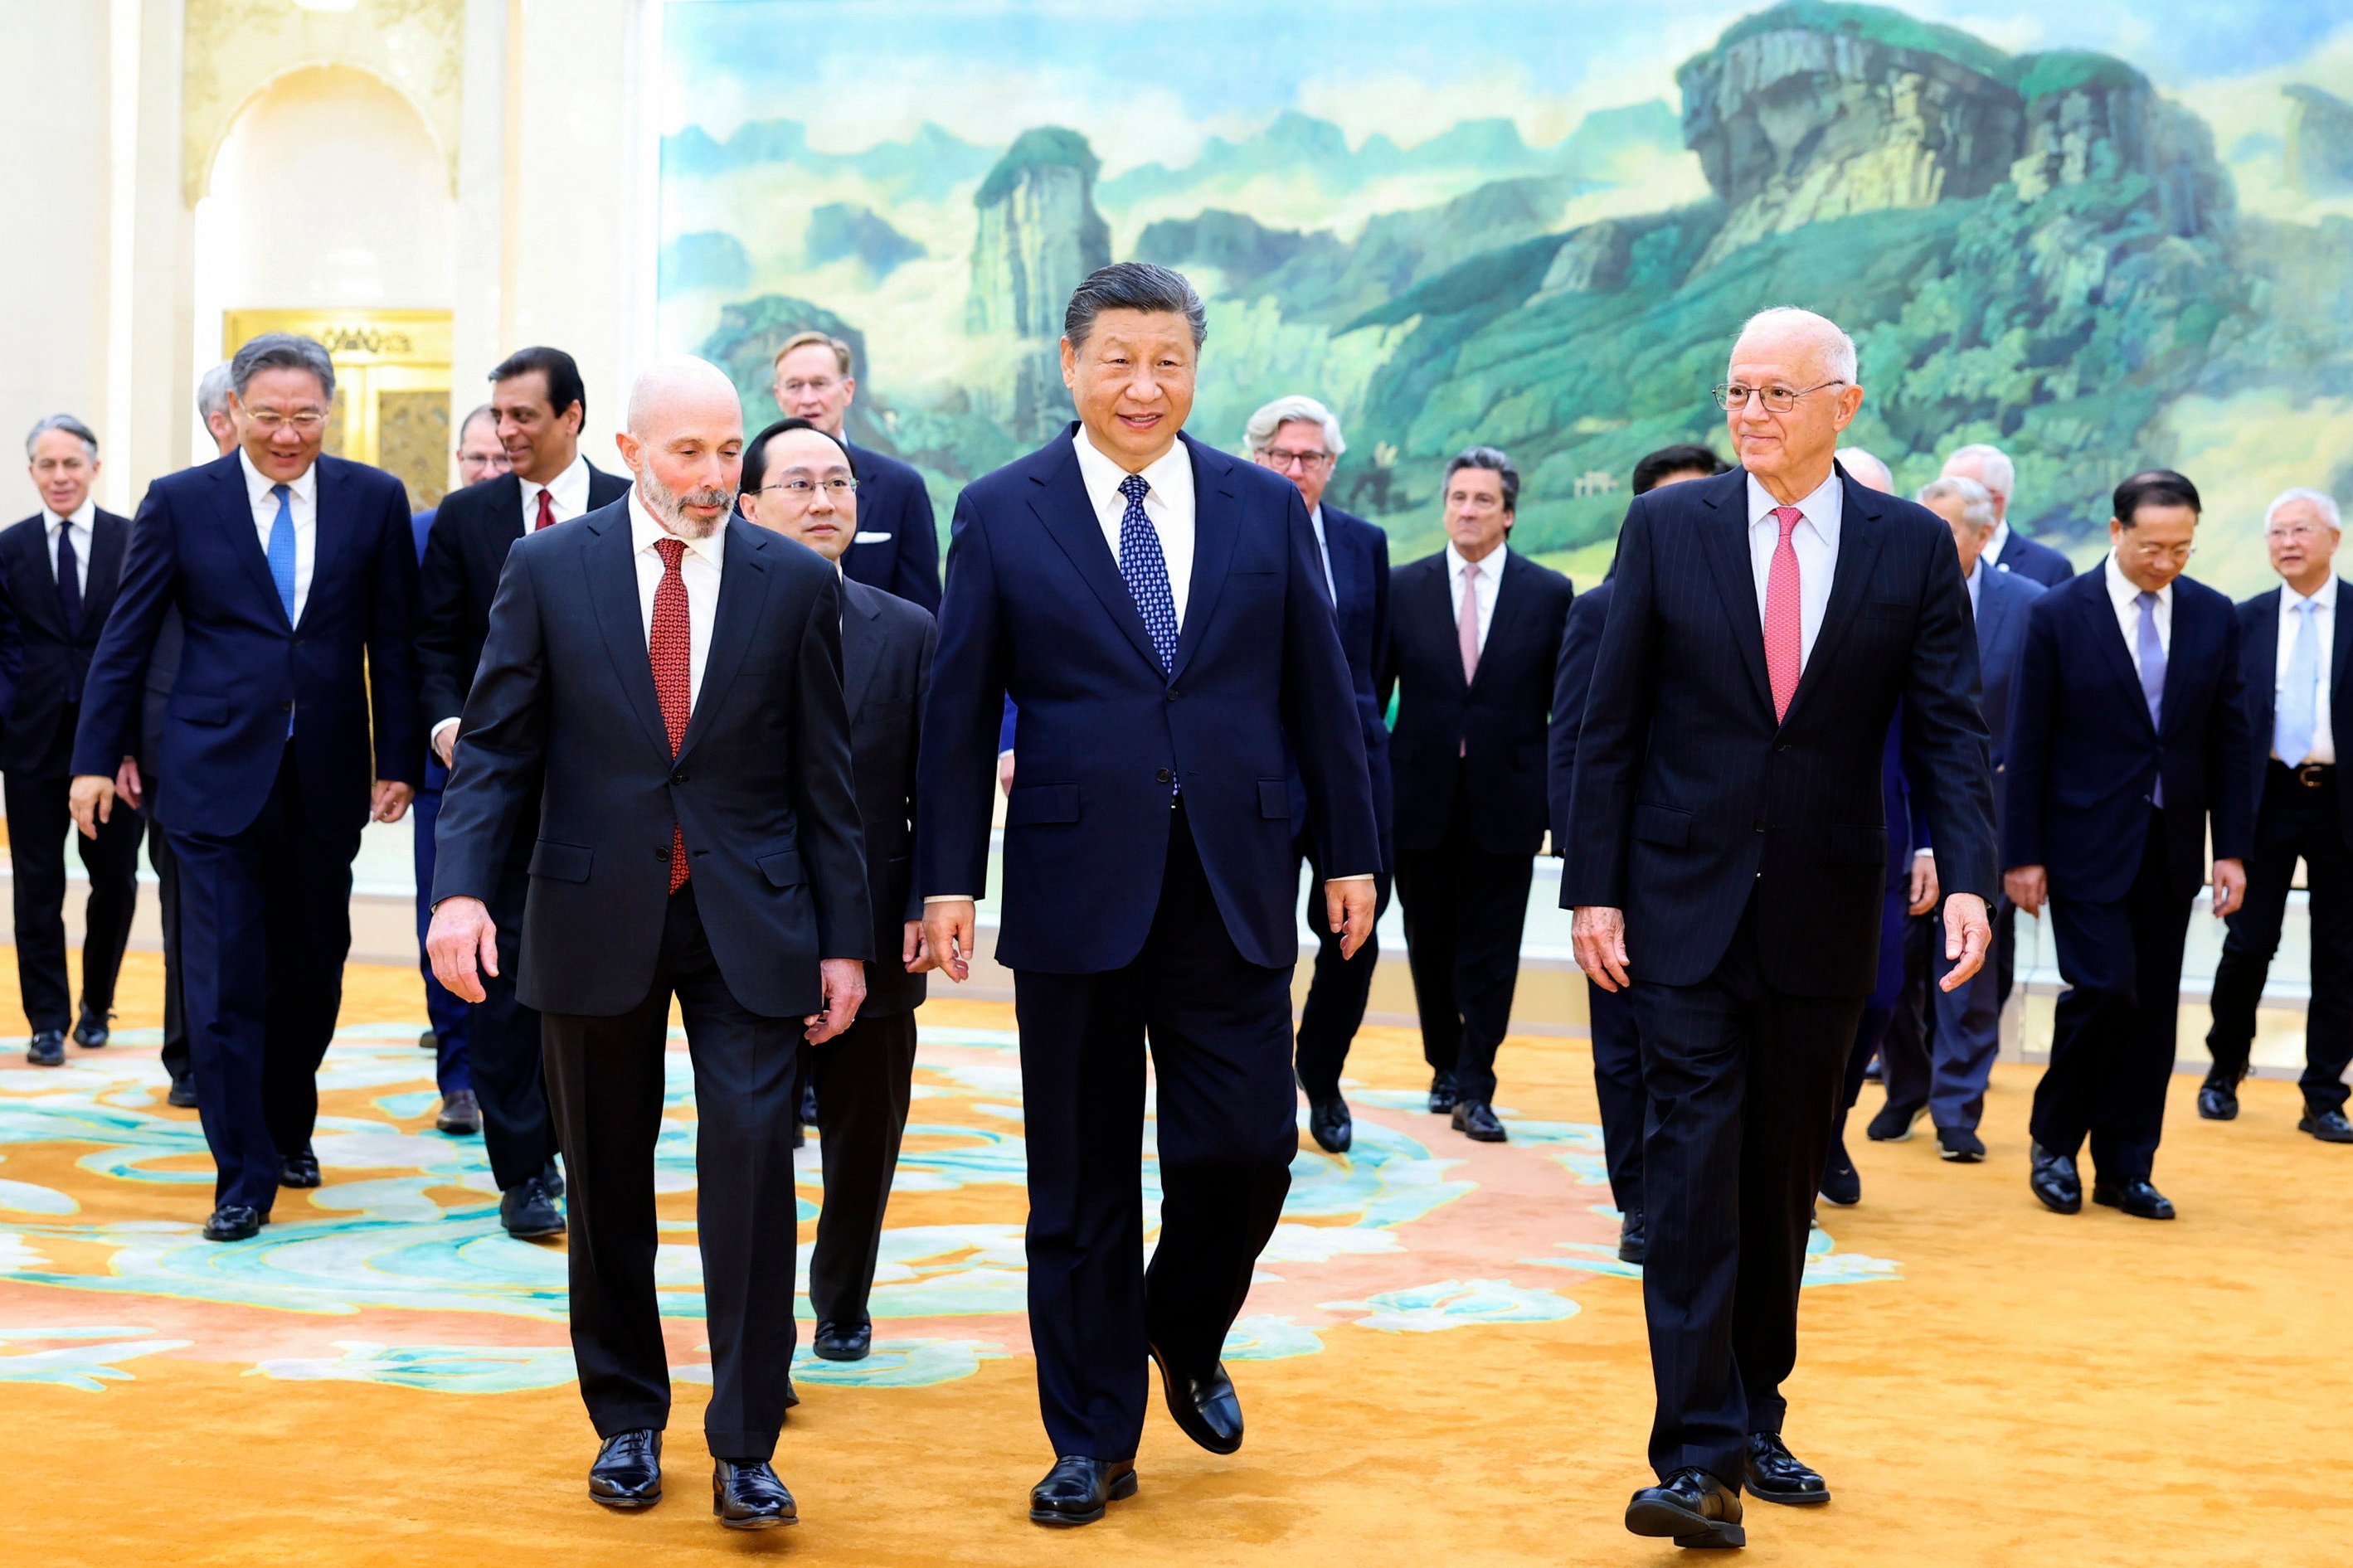 President Xi Jinping meets the US delegation at the Great Hall of the People in Beijing on Wednesday. Photo: Xinhua via AP